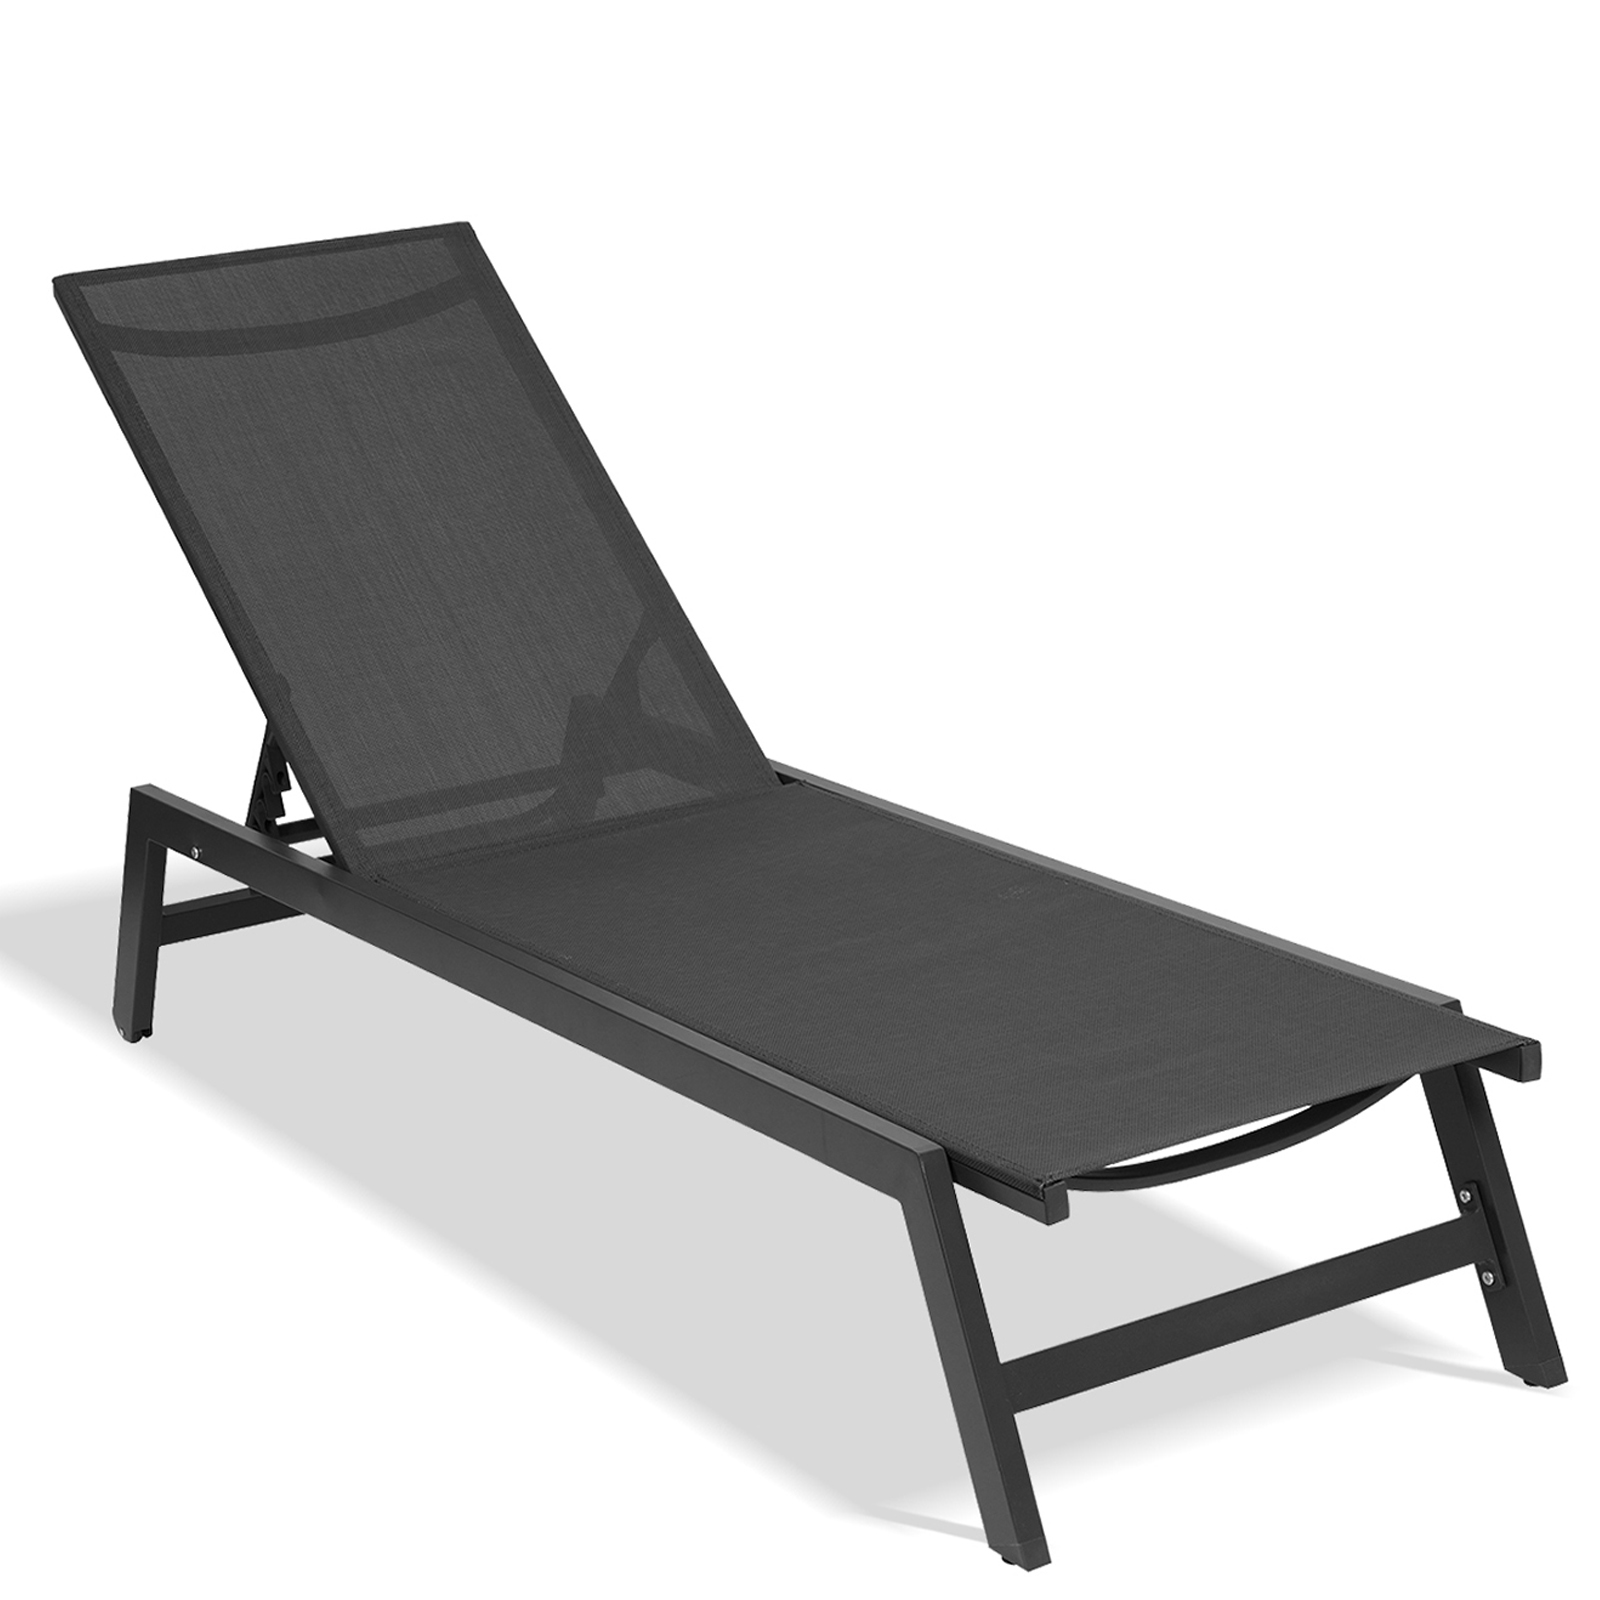 Seizeen Outdoor Chaise Lounge Chair, Five-Position Adjustable Patio Lounge Chair for Poolside Deck Porch Backyard, Black Aluminum Frame Furniture Set with Wheels - image 2 of 11